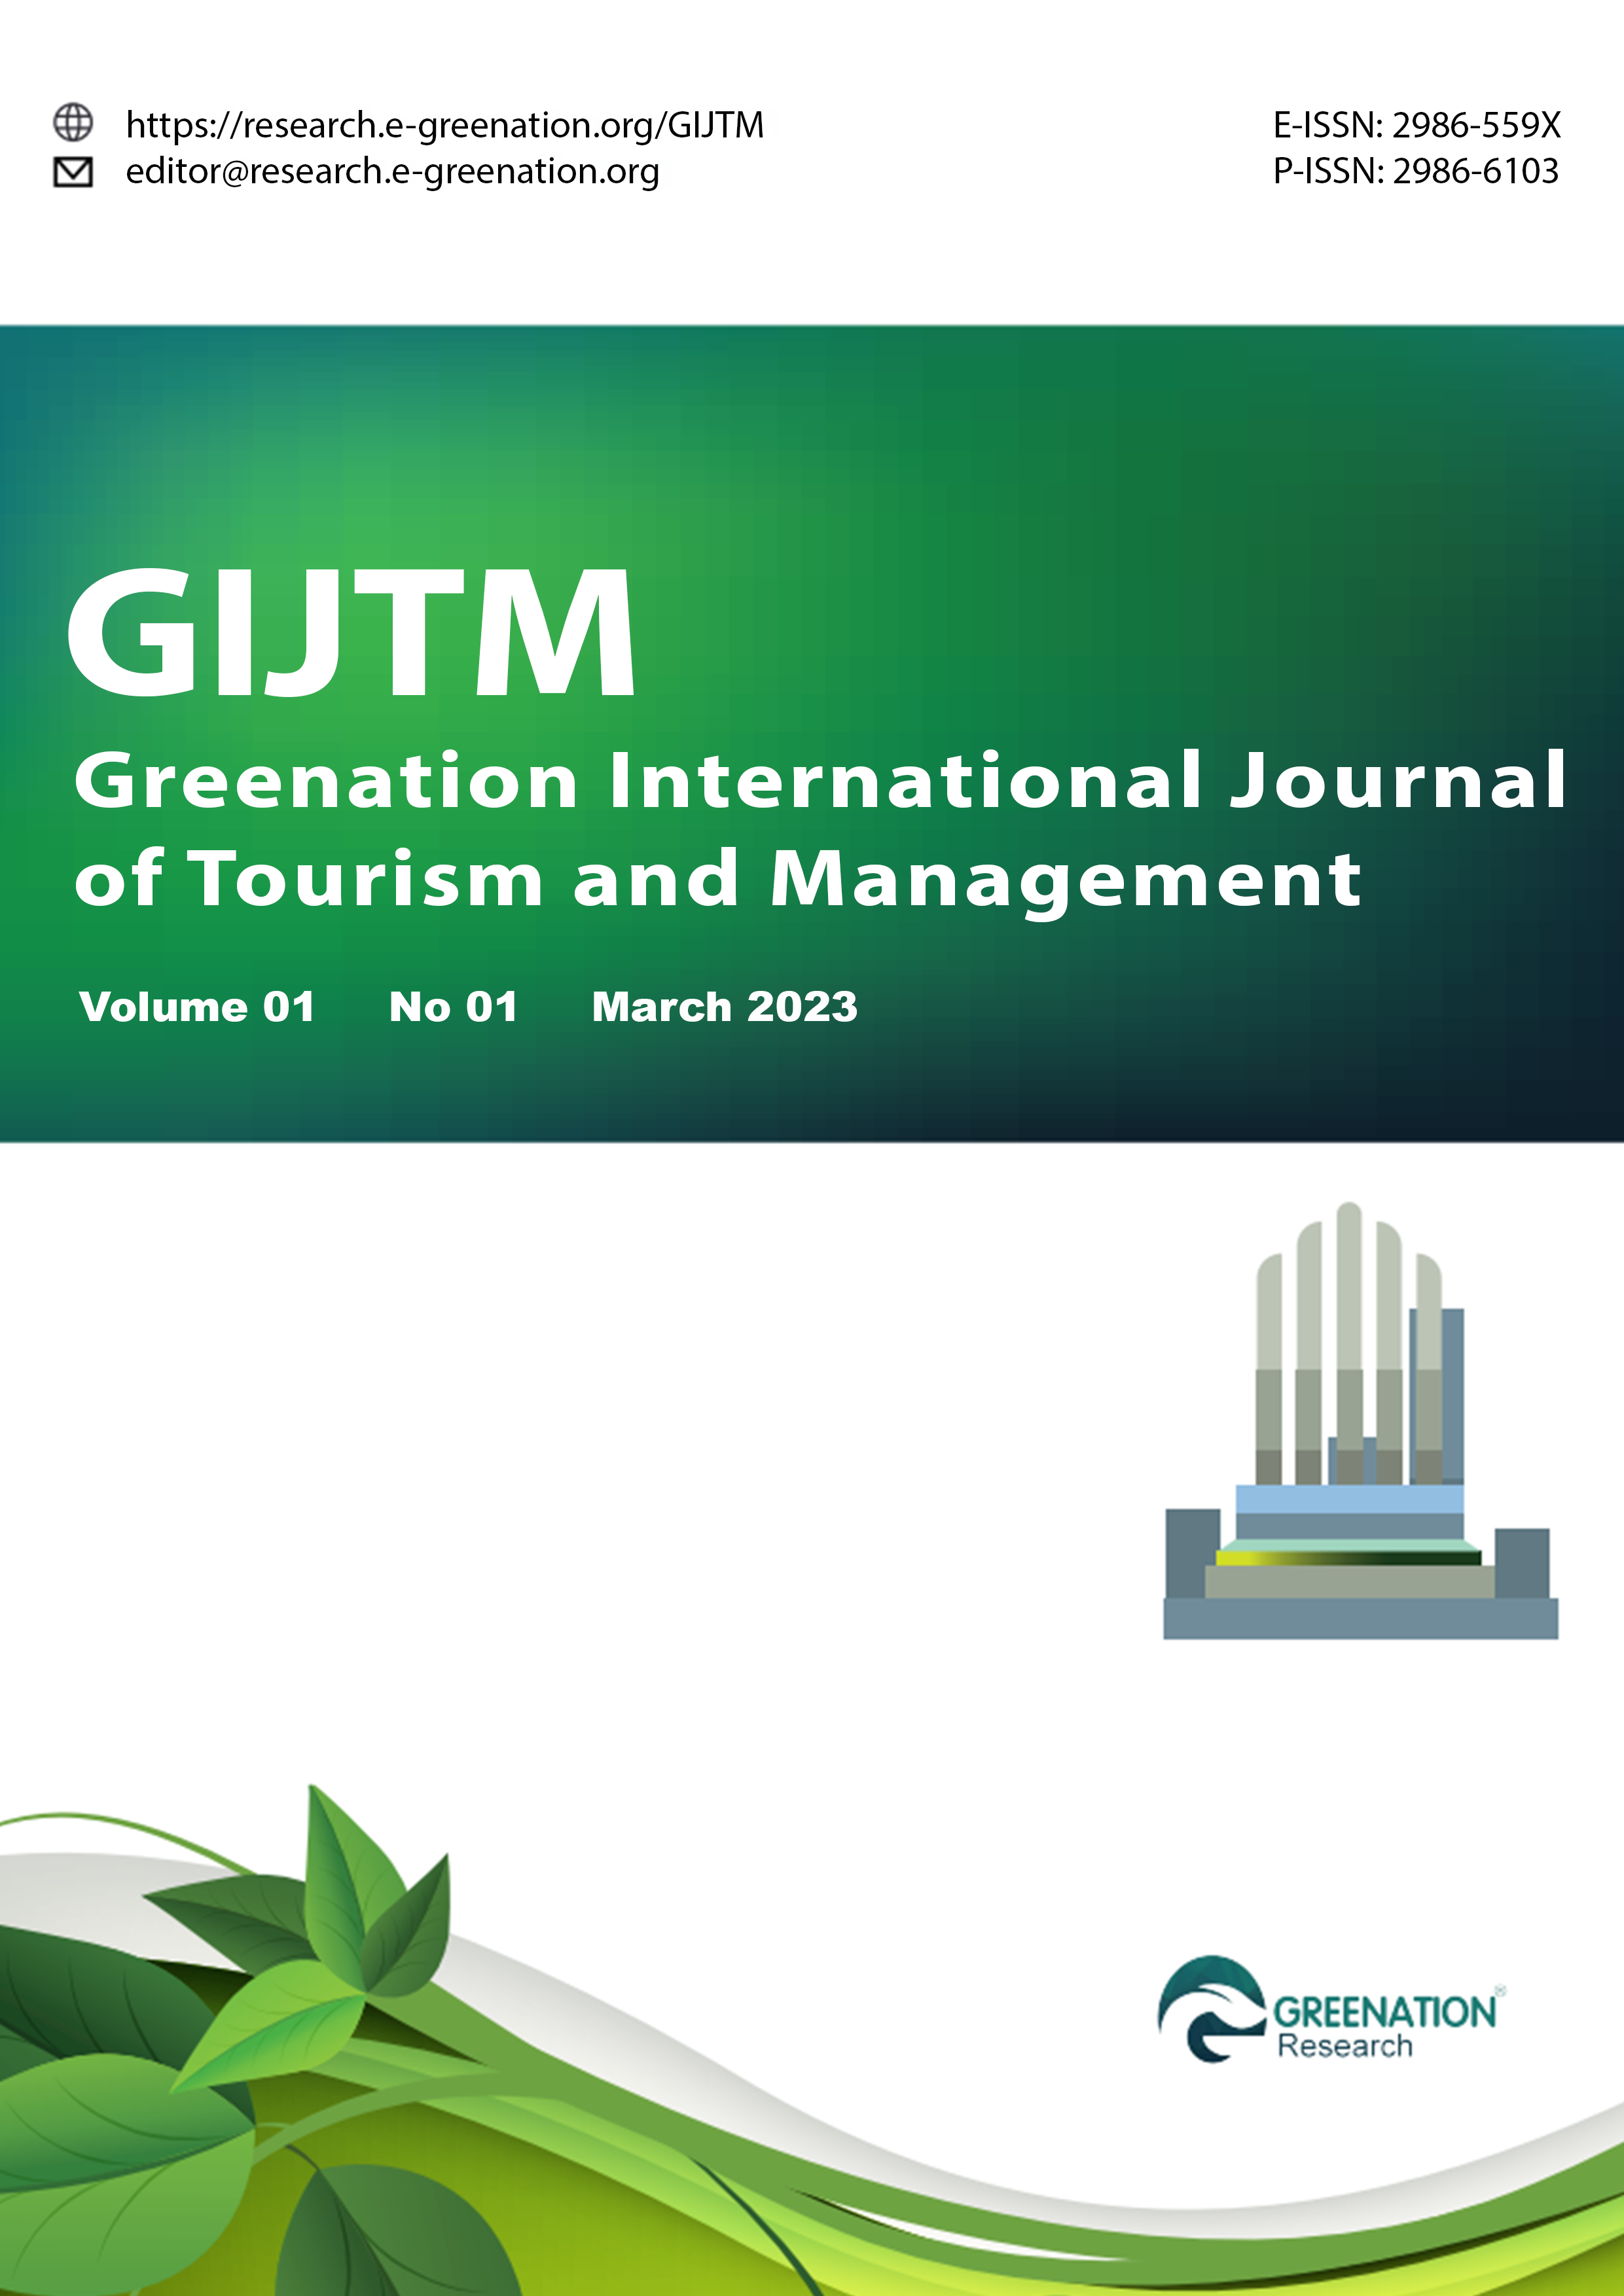 					View Vol. 1 No. 1 (2023): (GIJTM) Greenation International Journal of Tourism and Management (March - May 2023)
				